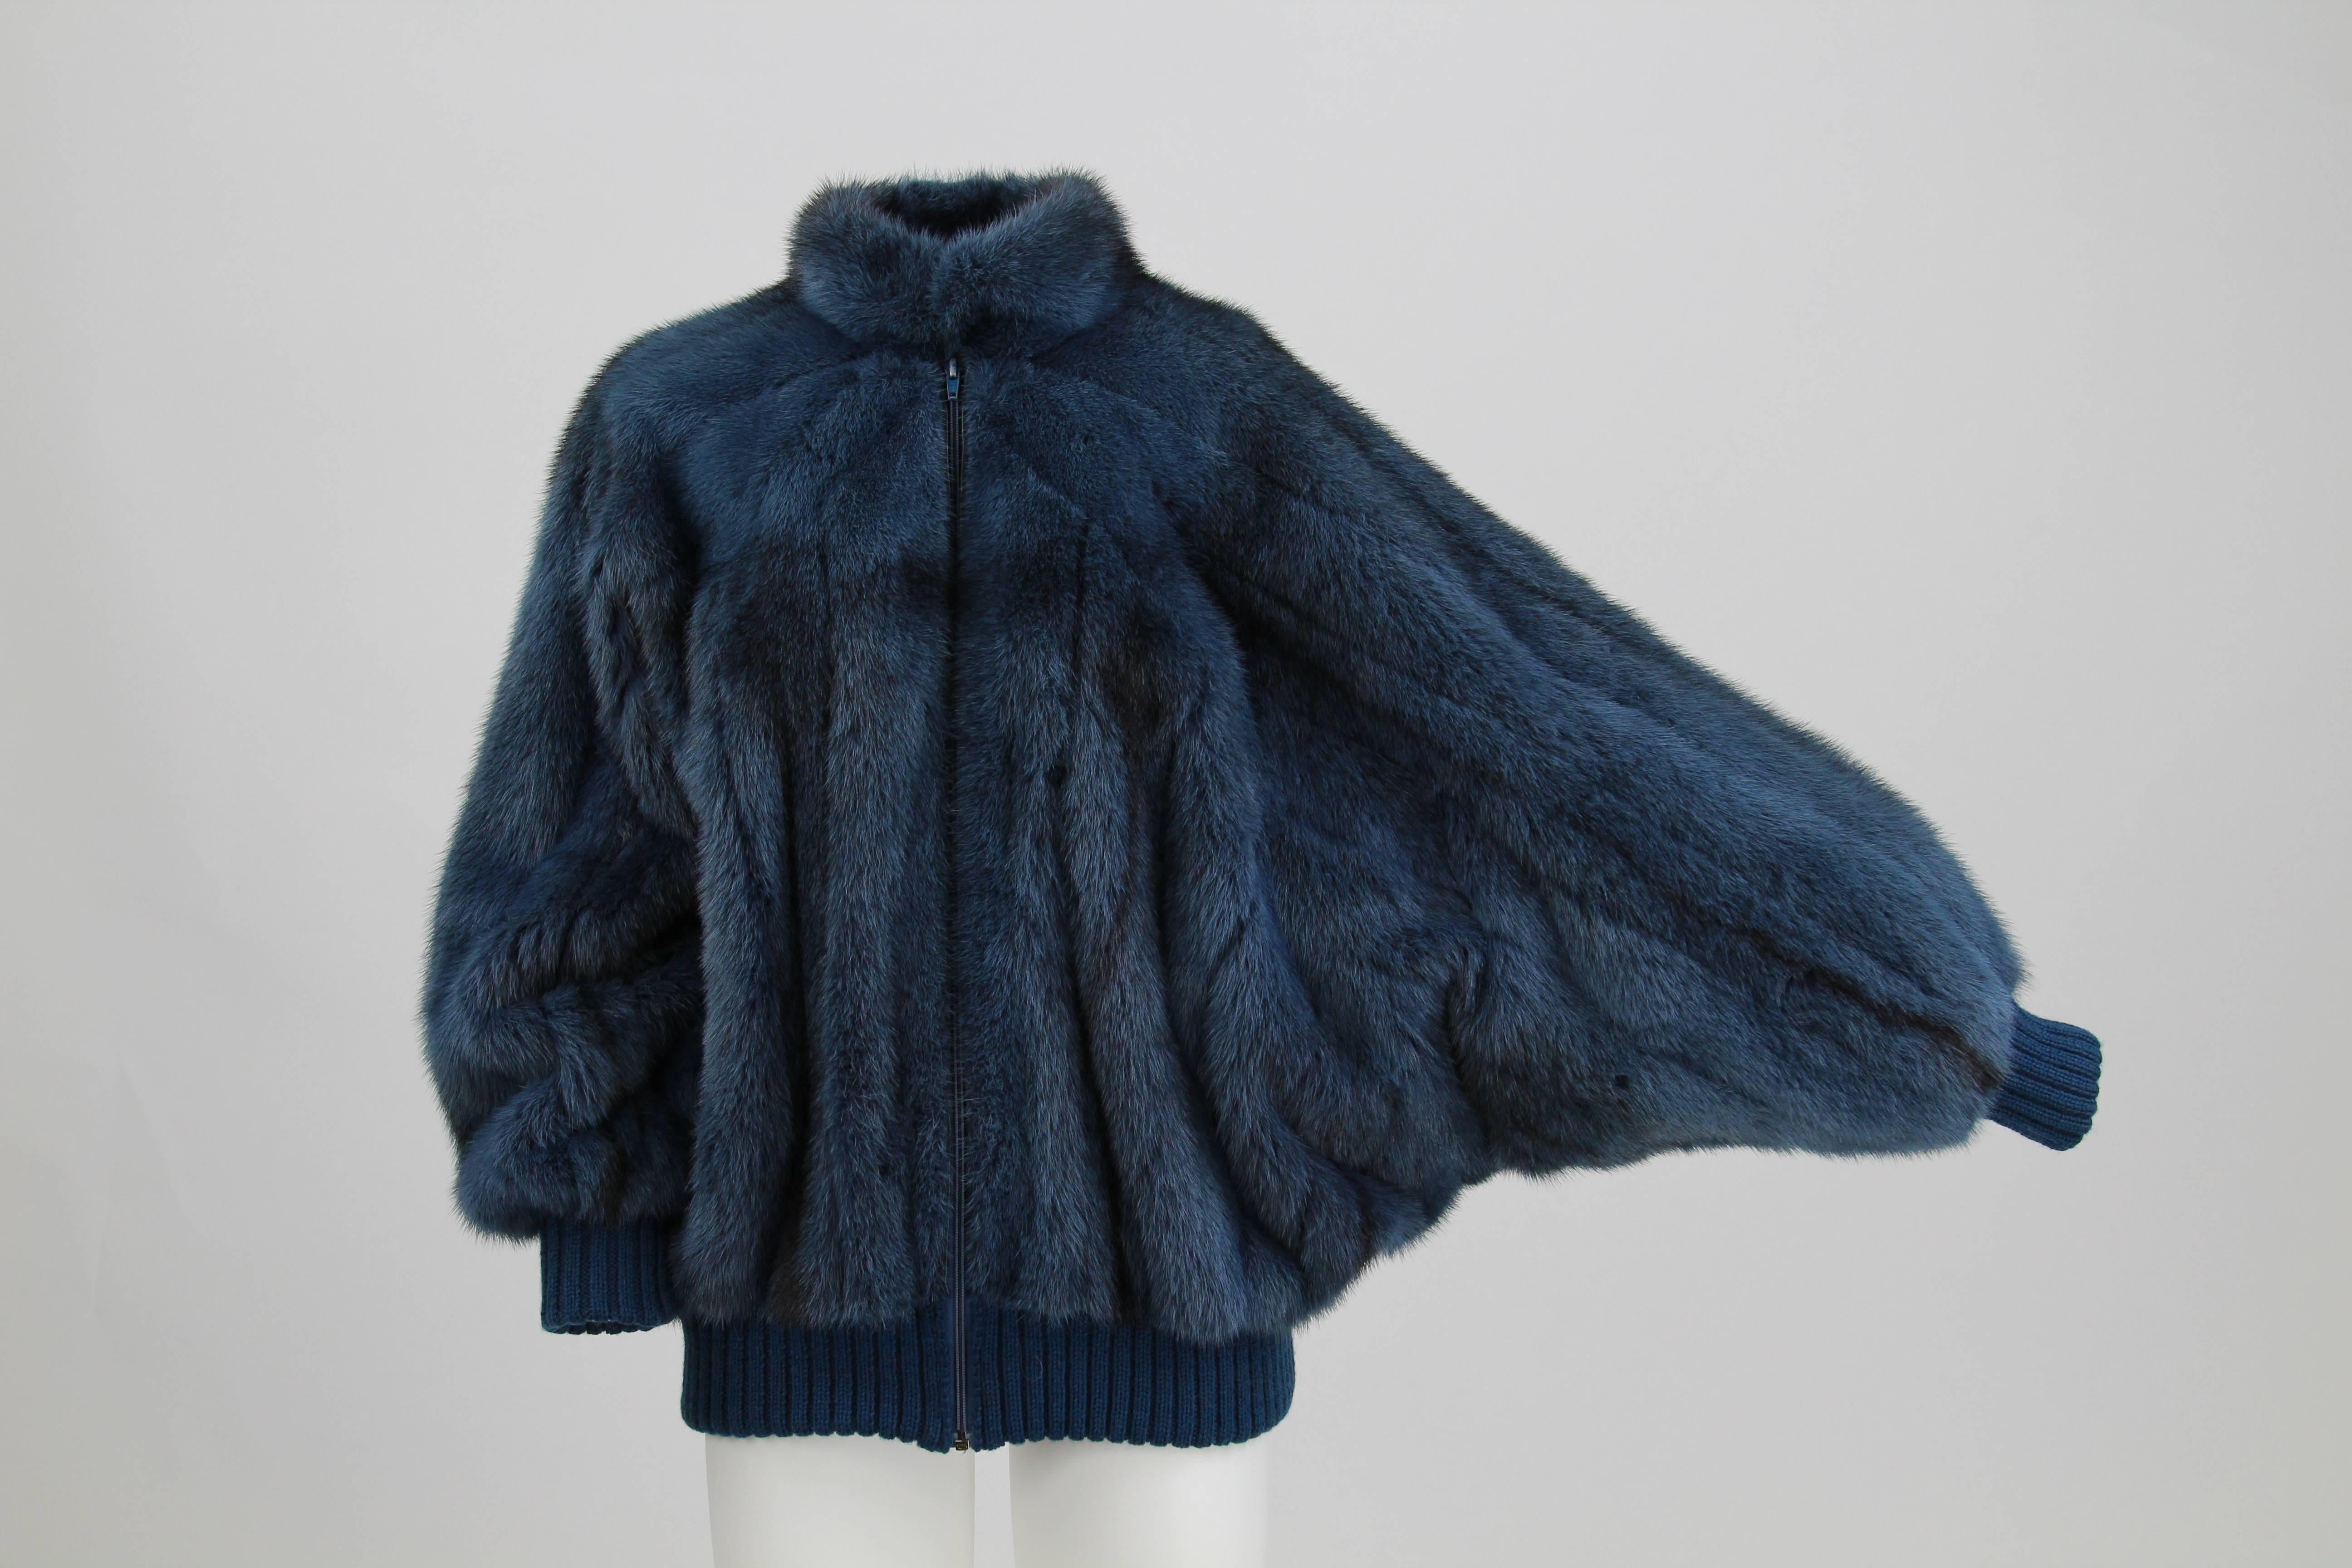 Iconic and handmade black cross male mink fur by Christian Dior, featuring a sporty style, wide sleeves and wool cuffs. 
Designed by Gianfranco Ferré and made in France, the fur dates back to late 1980s and is in excellent conditions.
Size: M
